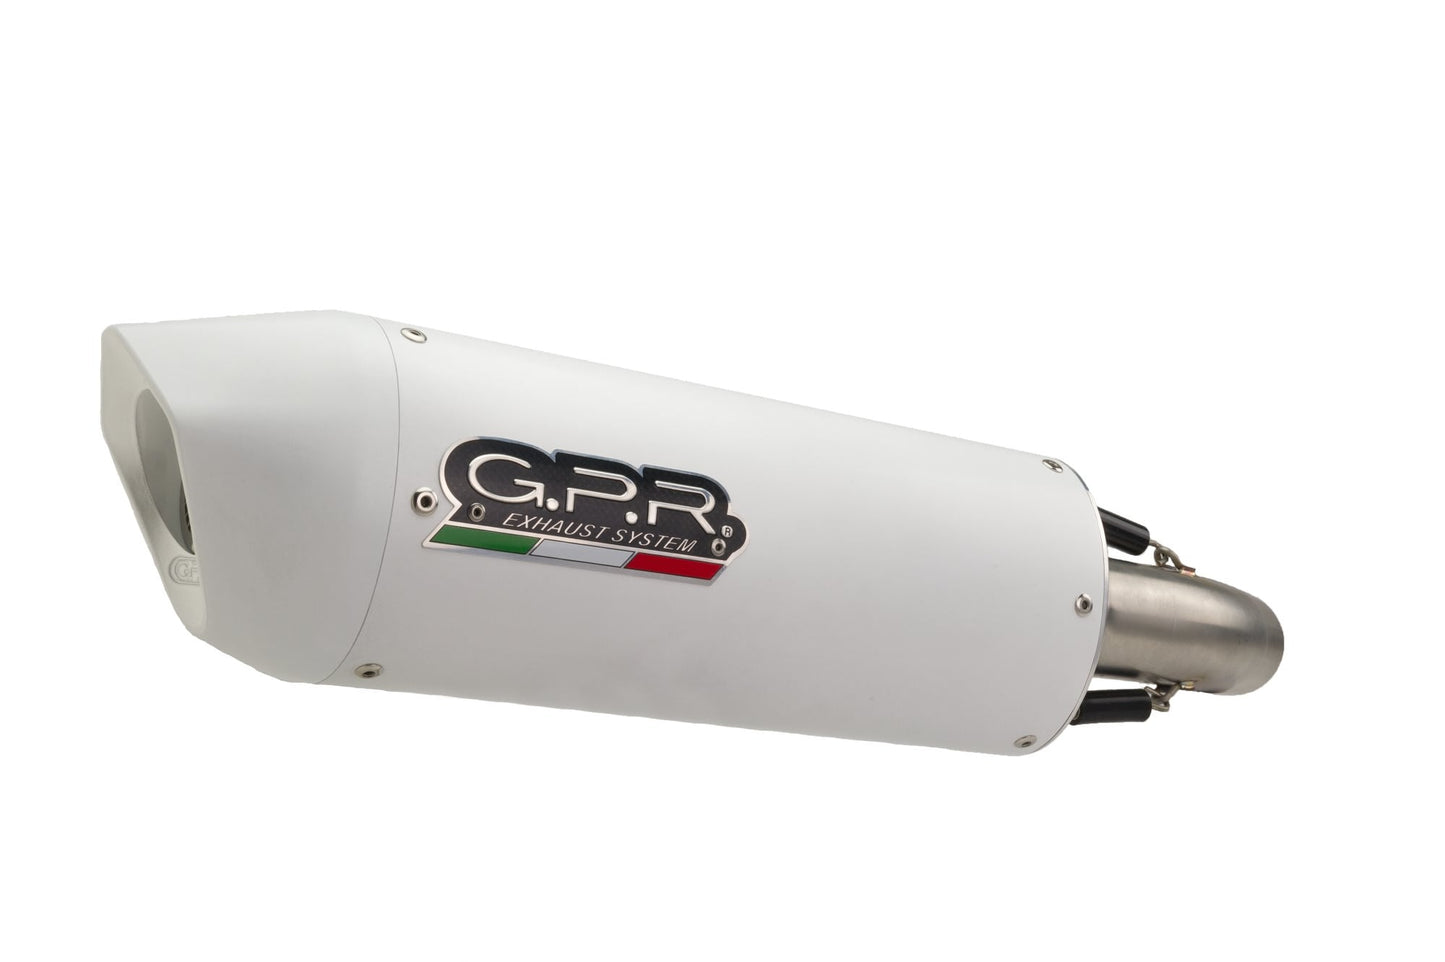 GPR Exhaust System Ducati Hypermotard 821 2013-2016, Albus Ceramic, Slip-on Exhaust Including Removable DB Killer and Link Pipe  D.111.1.ALB